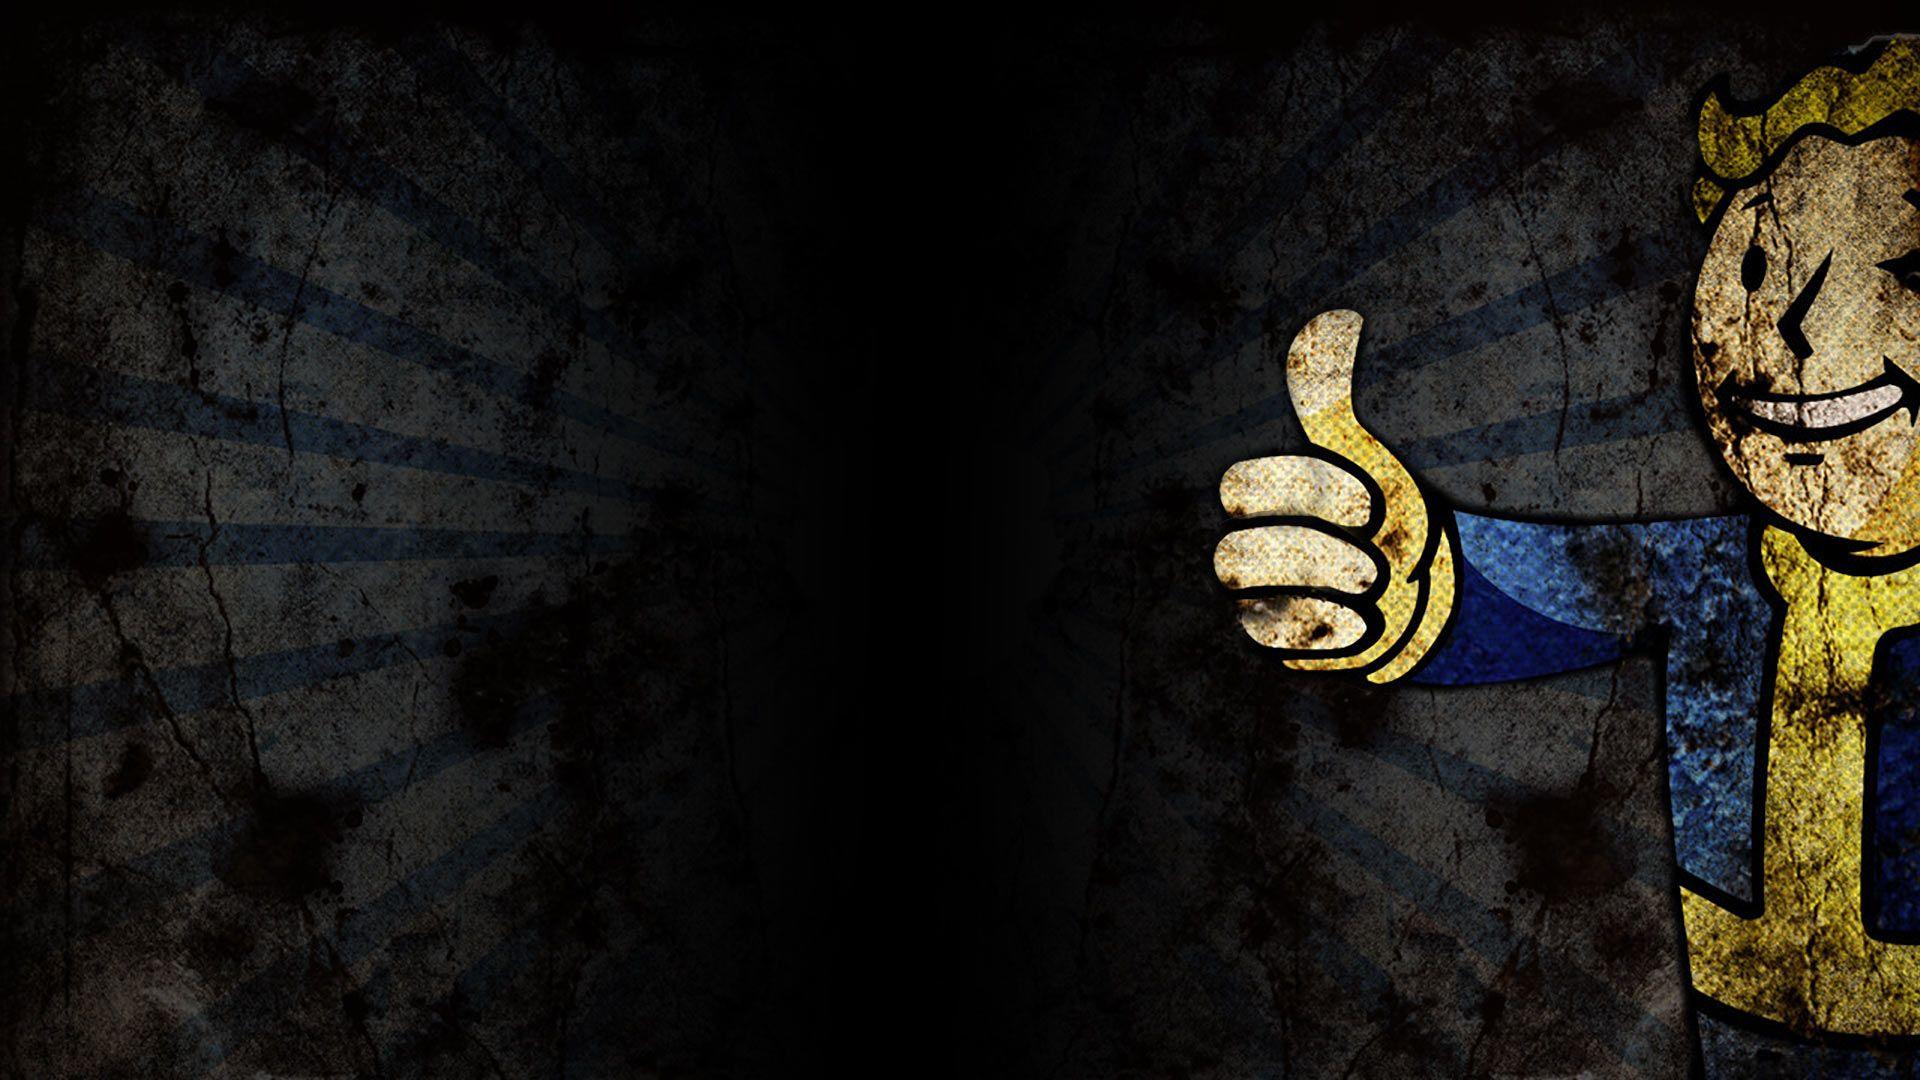 Awesome Vault Boy Wallpaper 25001 1920x1080 px